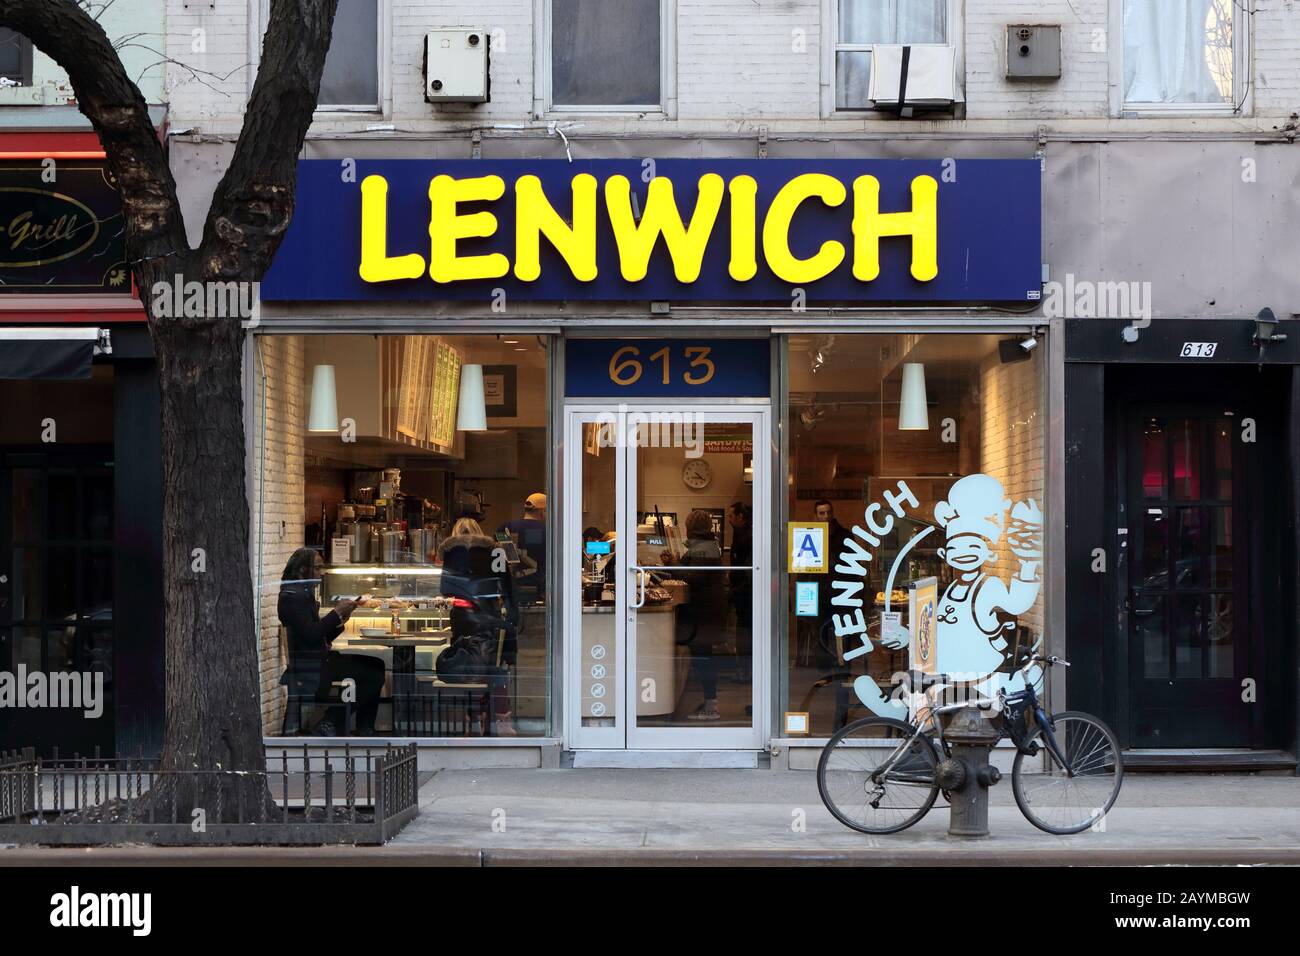 [historical storefront] Lenwich, 613 9th Ave, New York, NYC storefront photo of a bagel shop in the Hells Kitchen neighborhood of Manhattan. Stock Photo